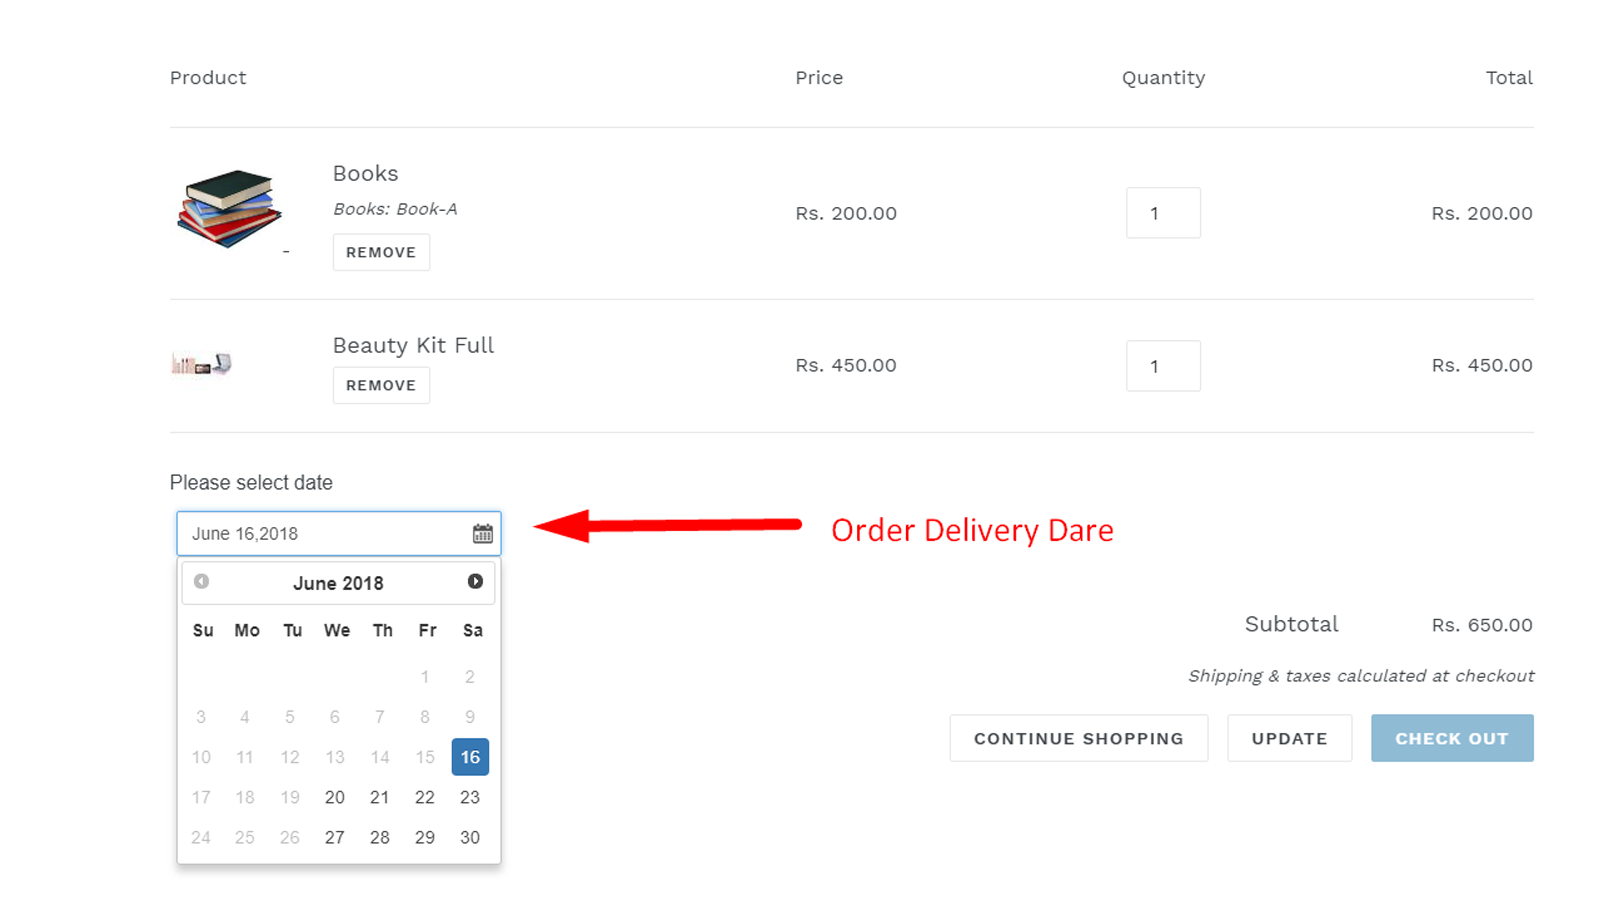 Order Delivery Date Picker